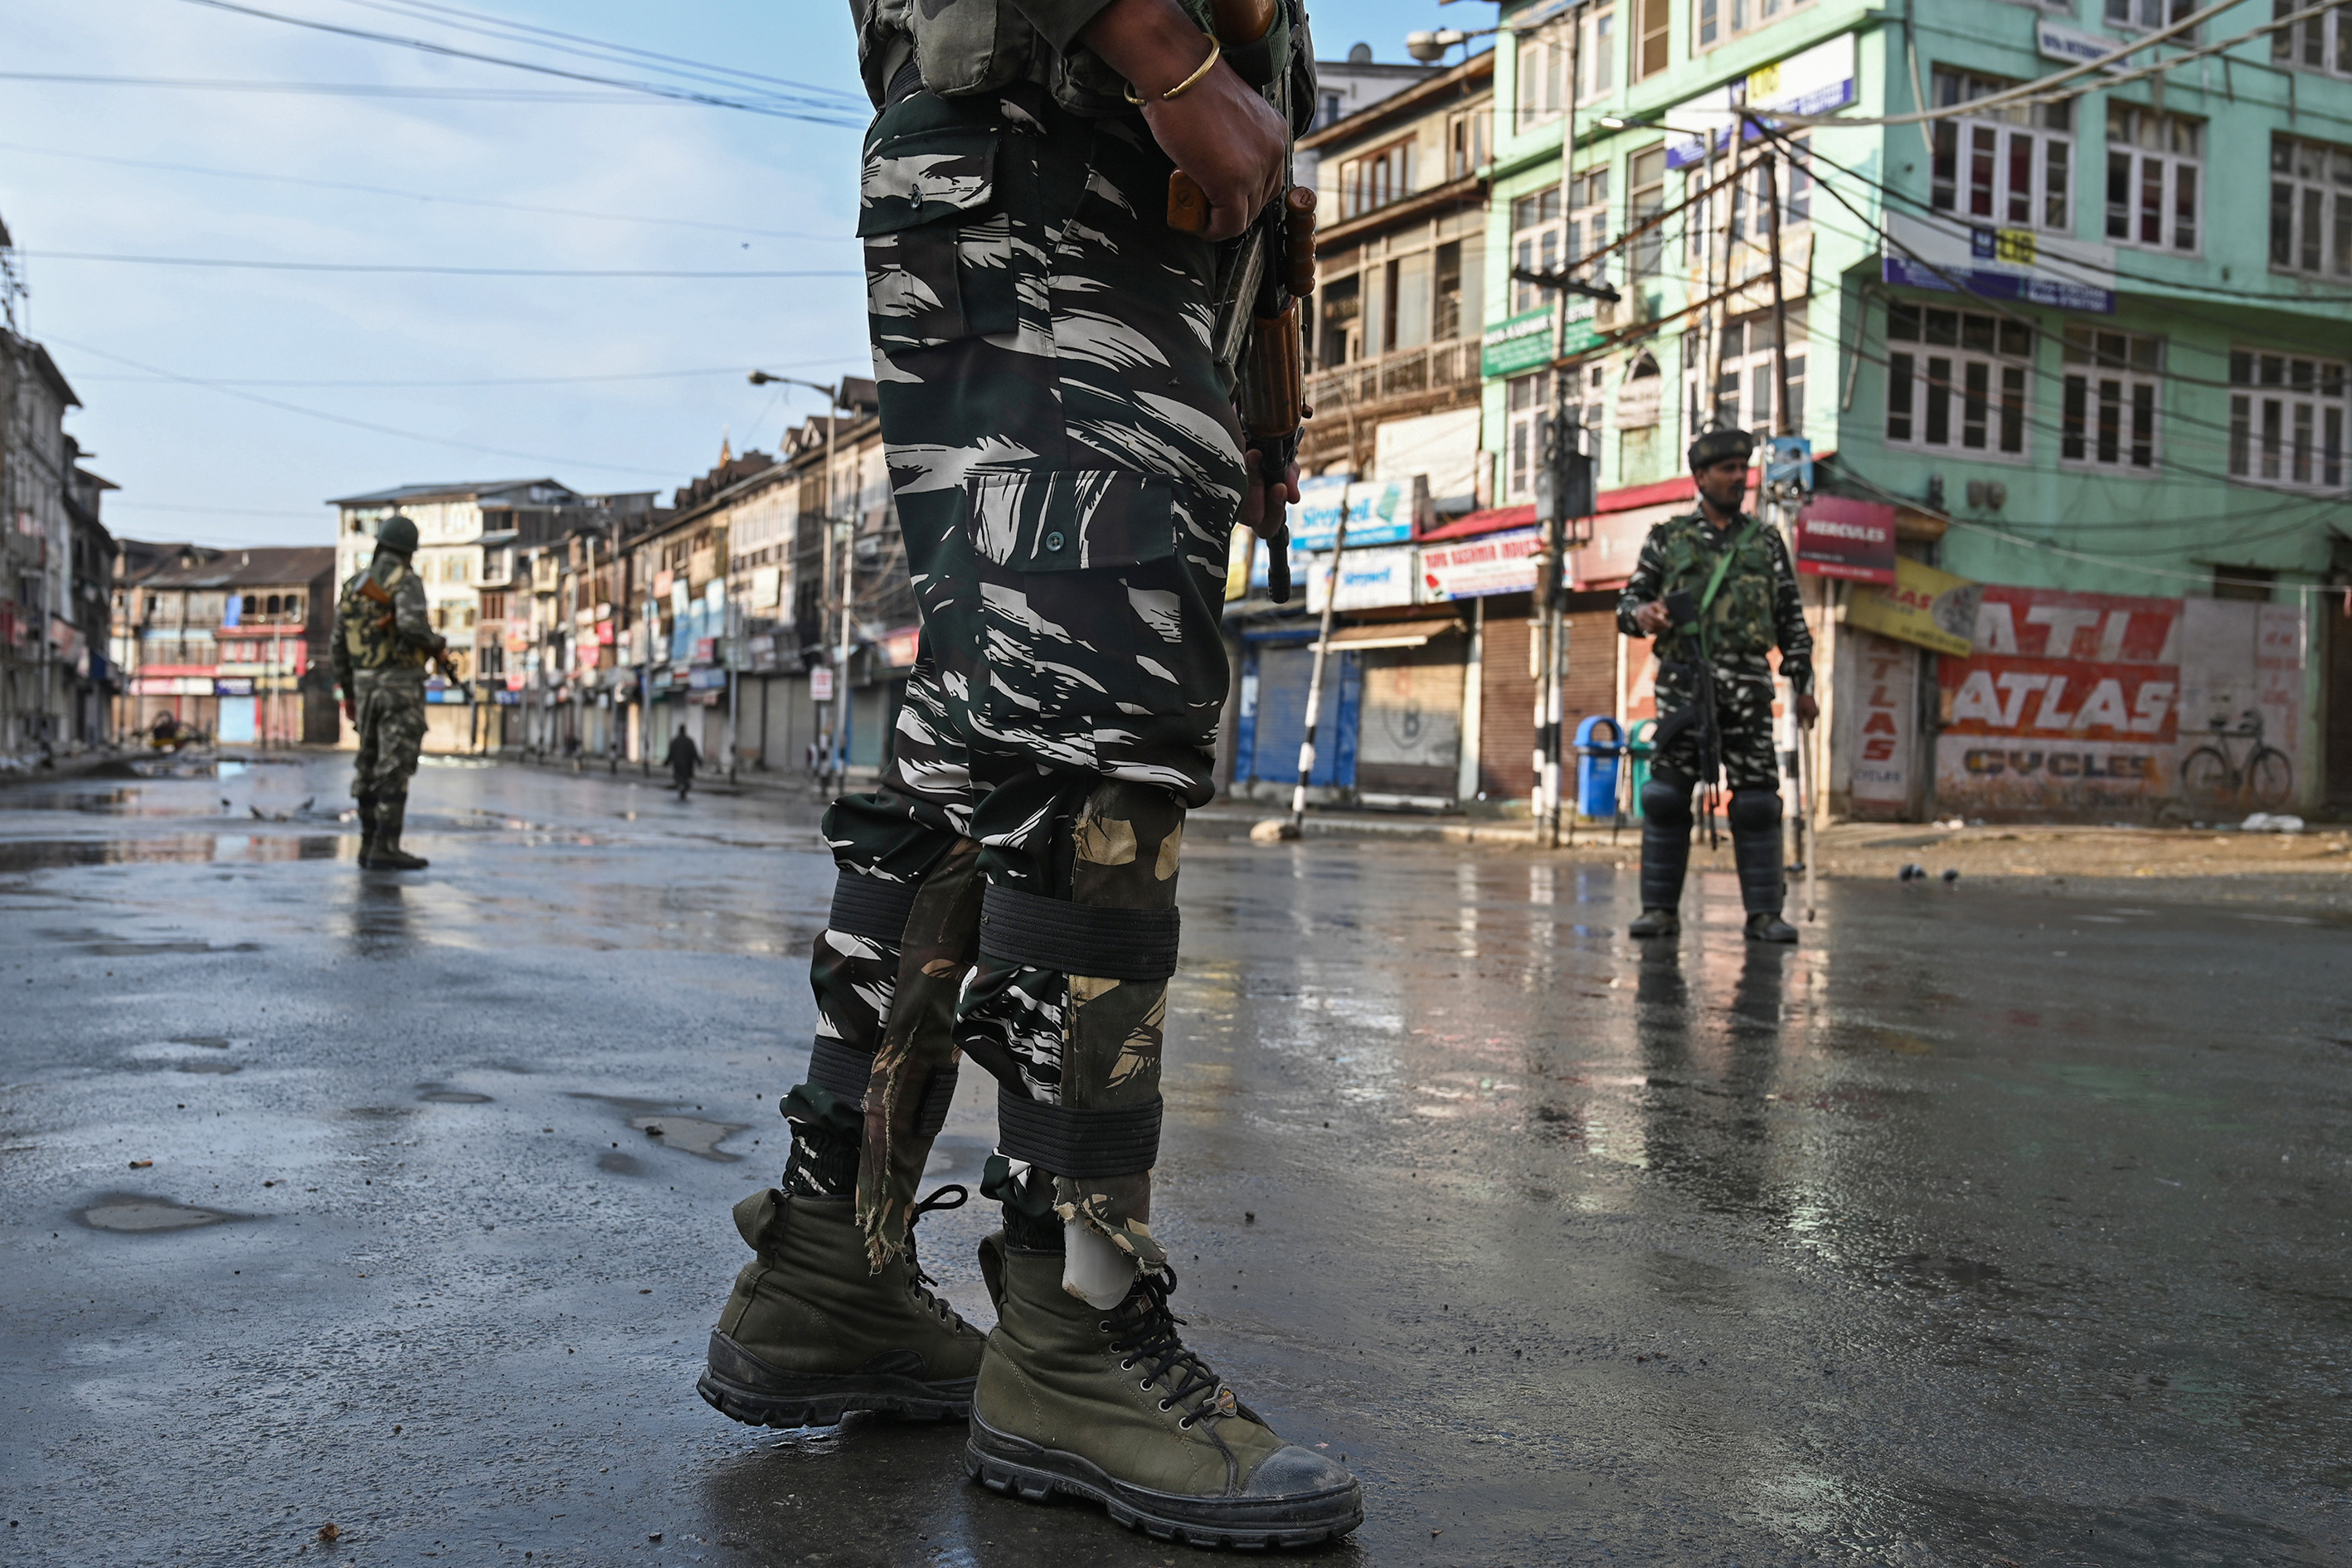 Indian security personnel stand guard on a street during a curfew in Srinagar on August 8, 2019, as widespread restrictions on movement and a telecommunications blackout remained in place aft